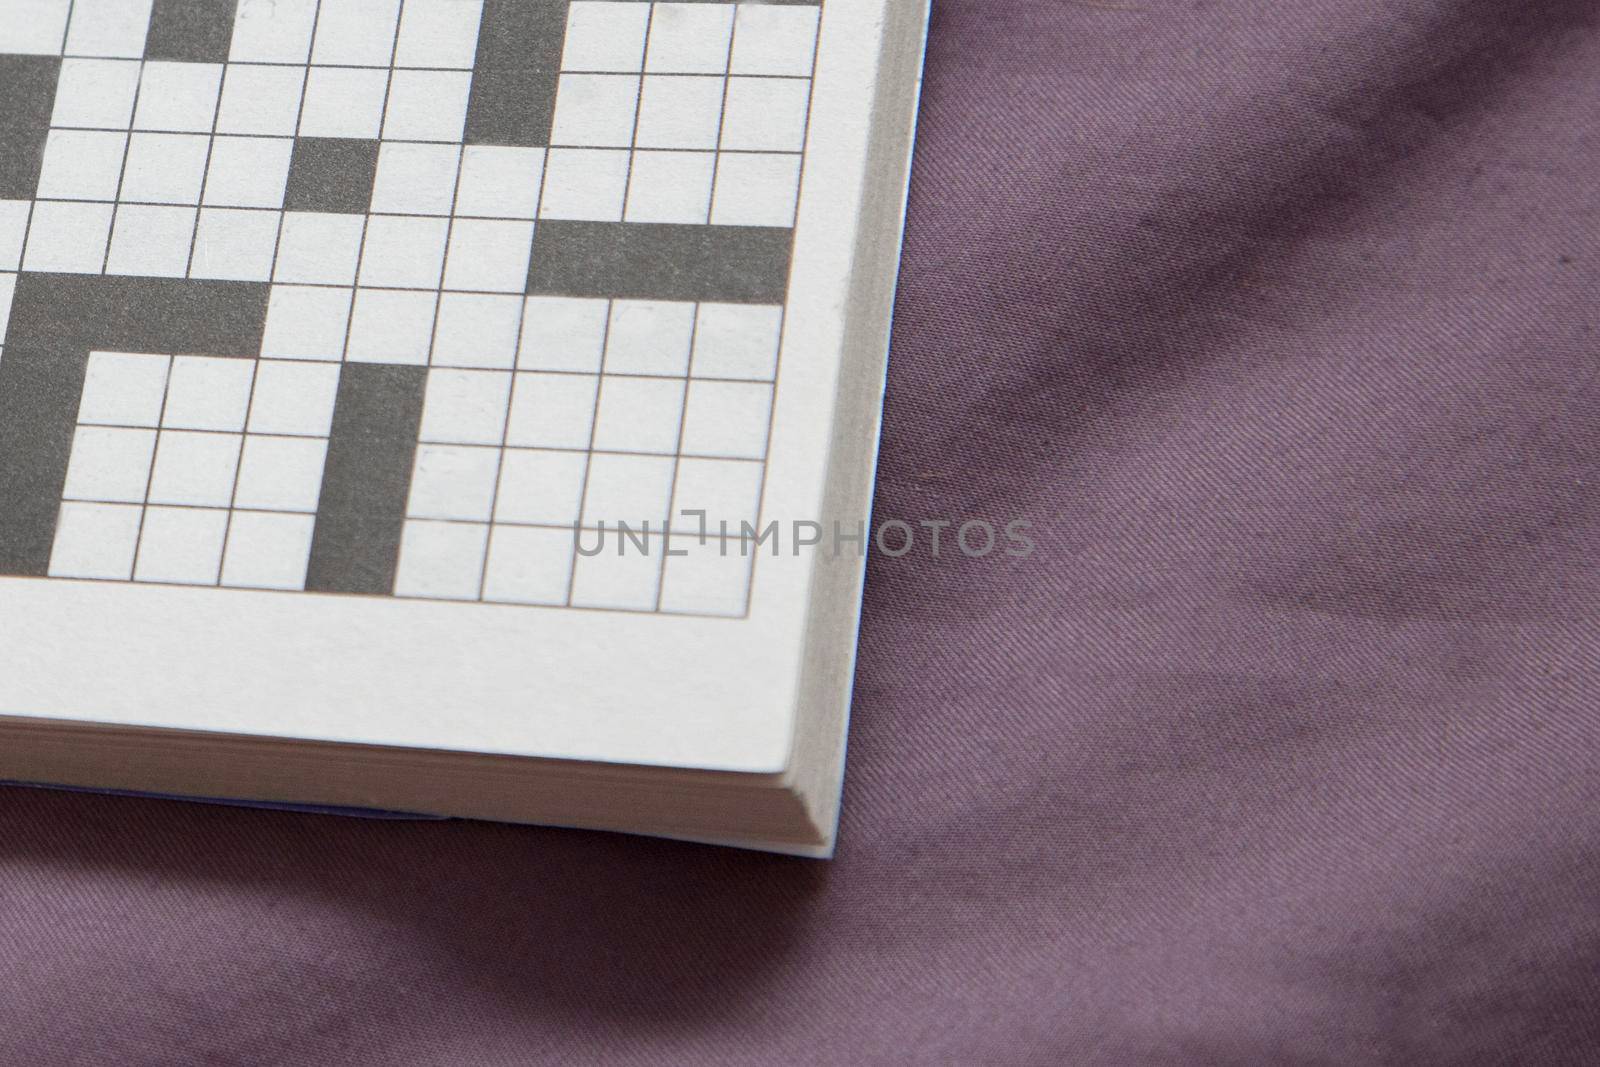  a crossword puzzle with empty spaces on a purple copy space